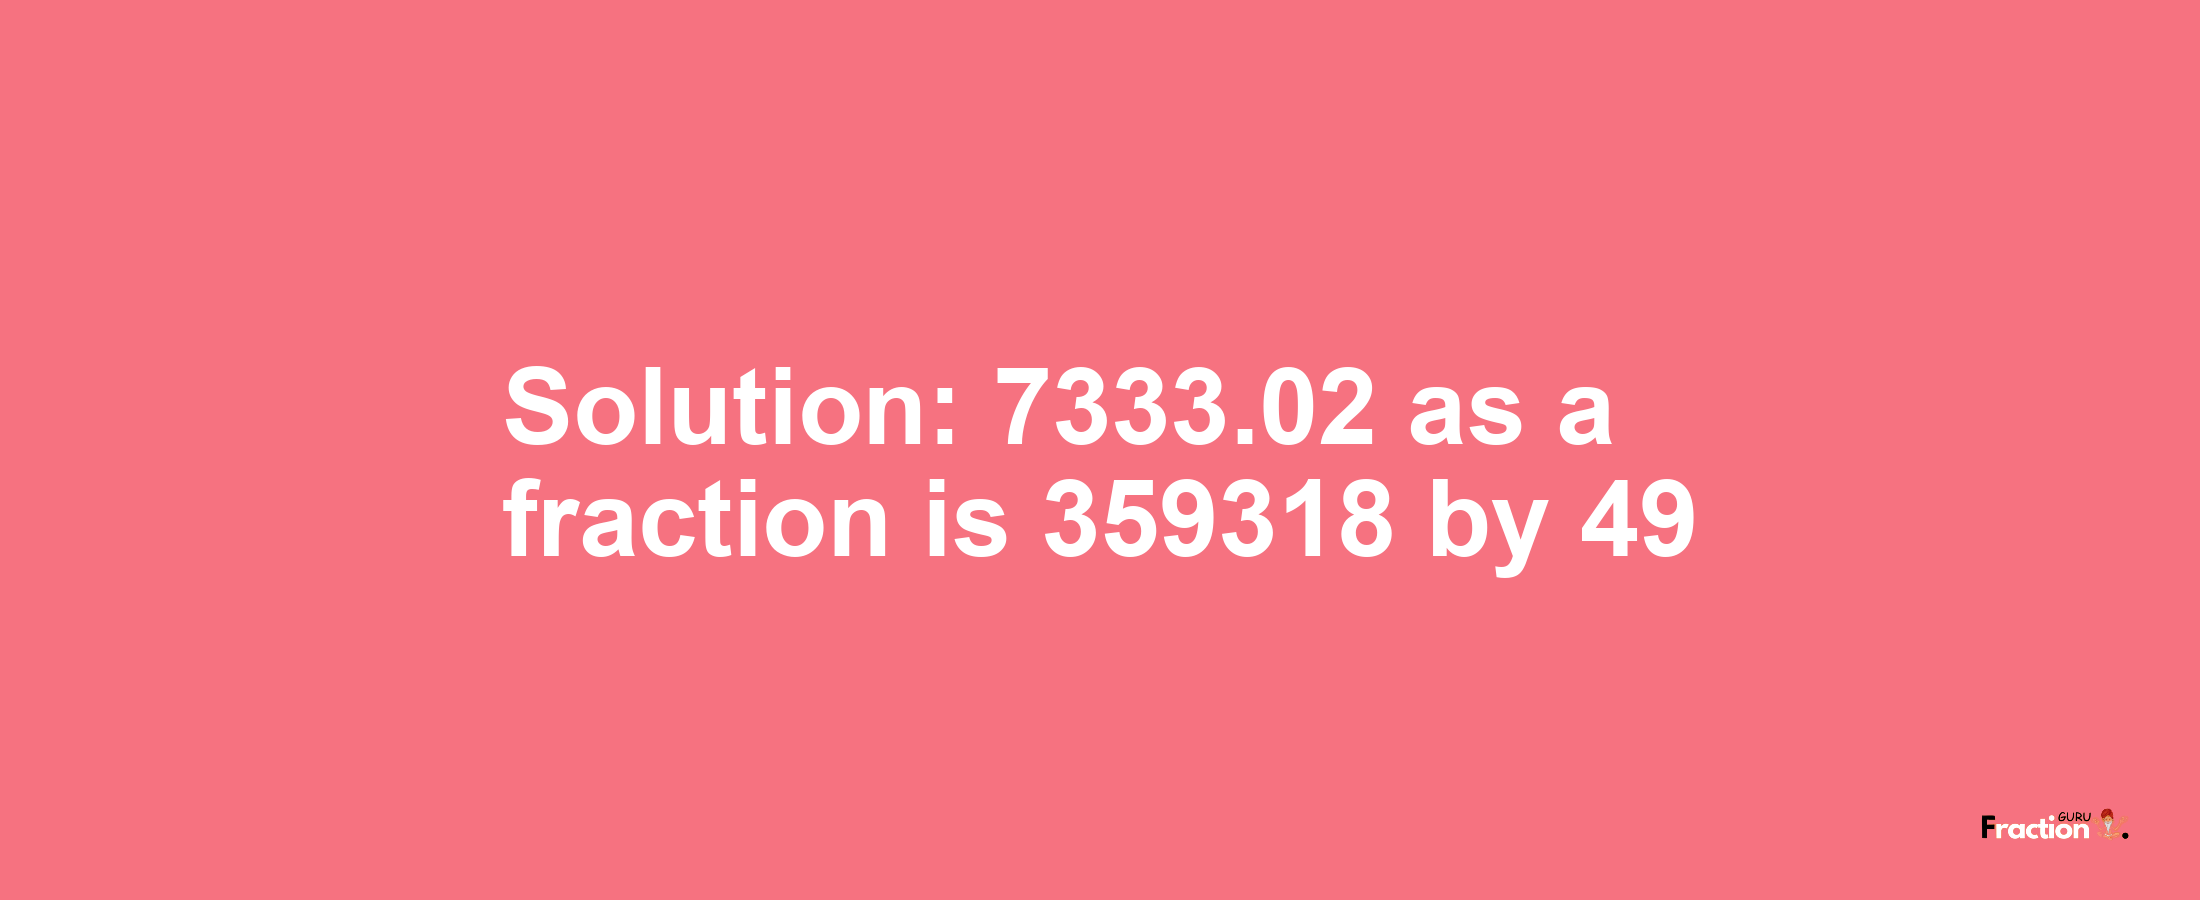 Solution:7333.02 as a fraction is 359318/49